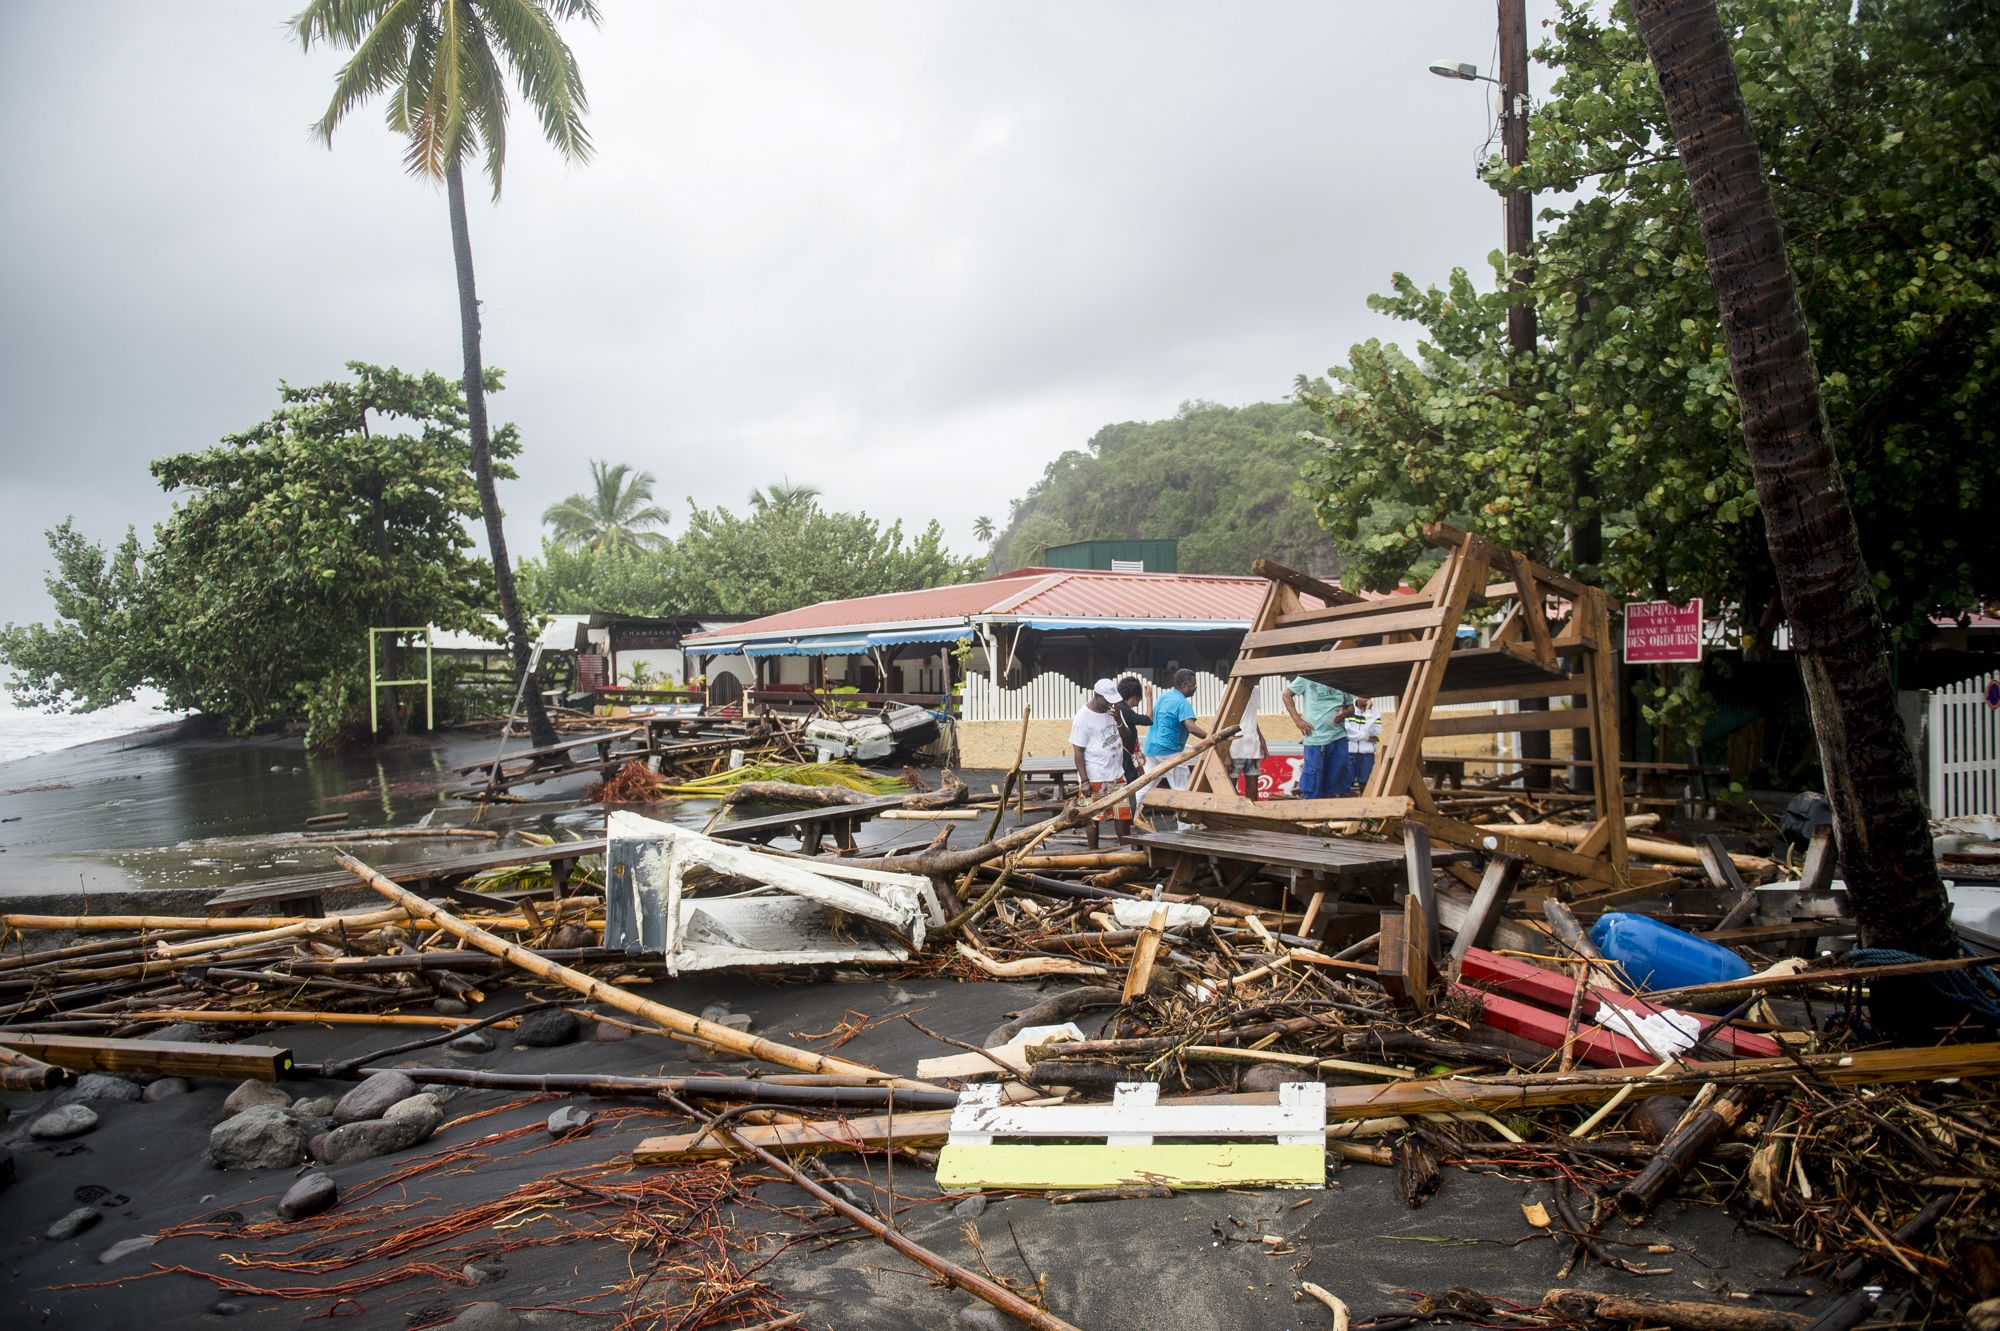 PHOTO: People stand among the debris at a restaurant in Le Carbet, on the French Caribbean island of Martinique, after it was hit by Hurricane Maria, on September 19, 2017.
